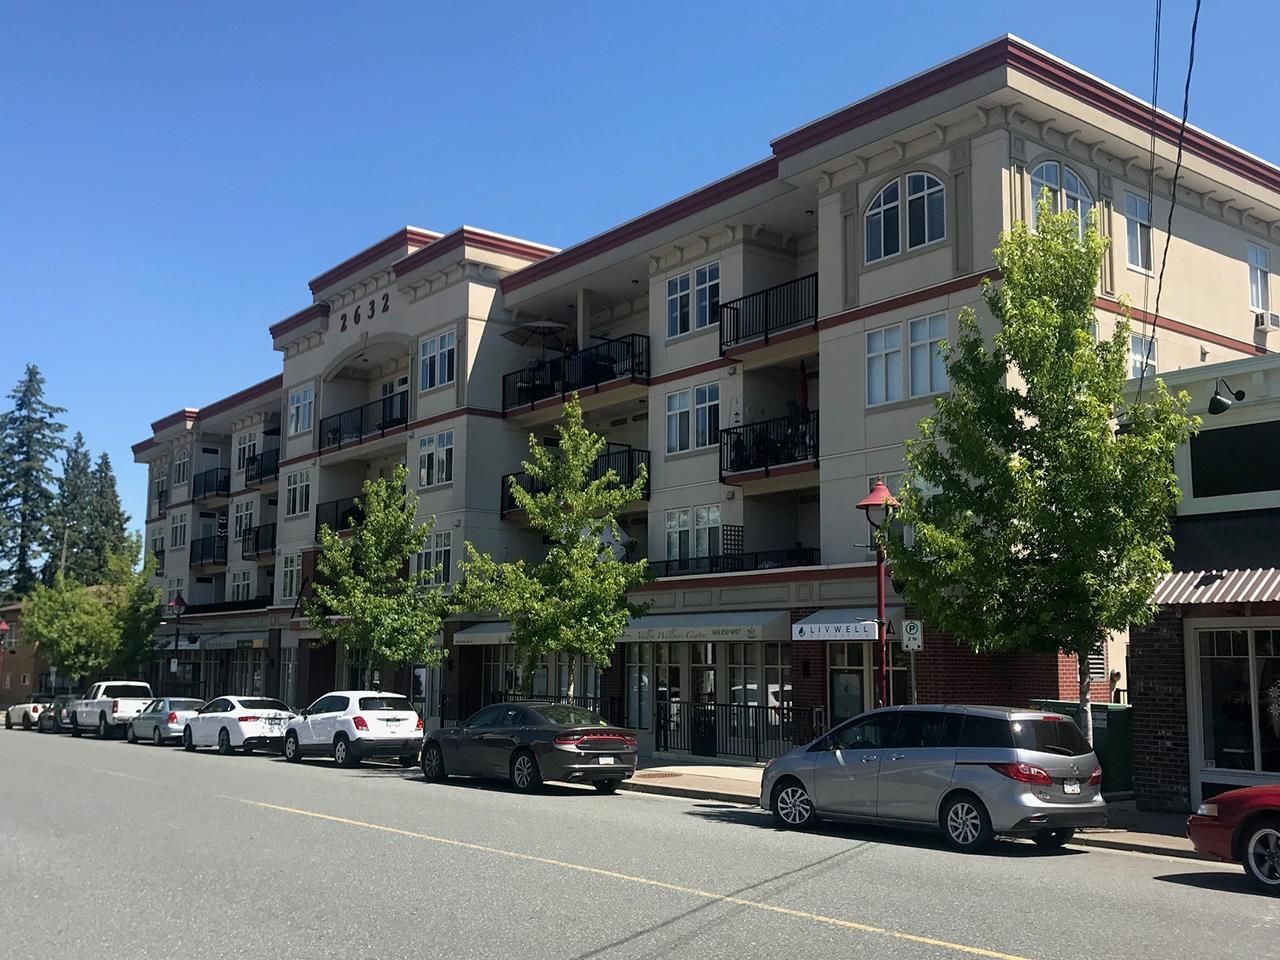 Main Photo: 115 2632 PAULINE Street in Abbotsford: Central Abbotsford Office for lease : MLS®# C8041923